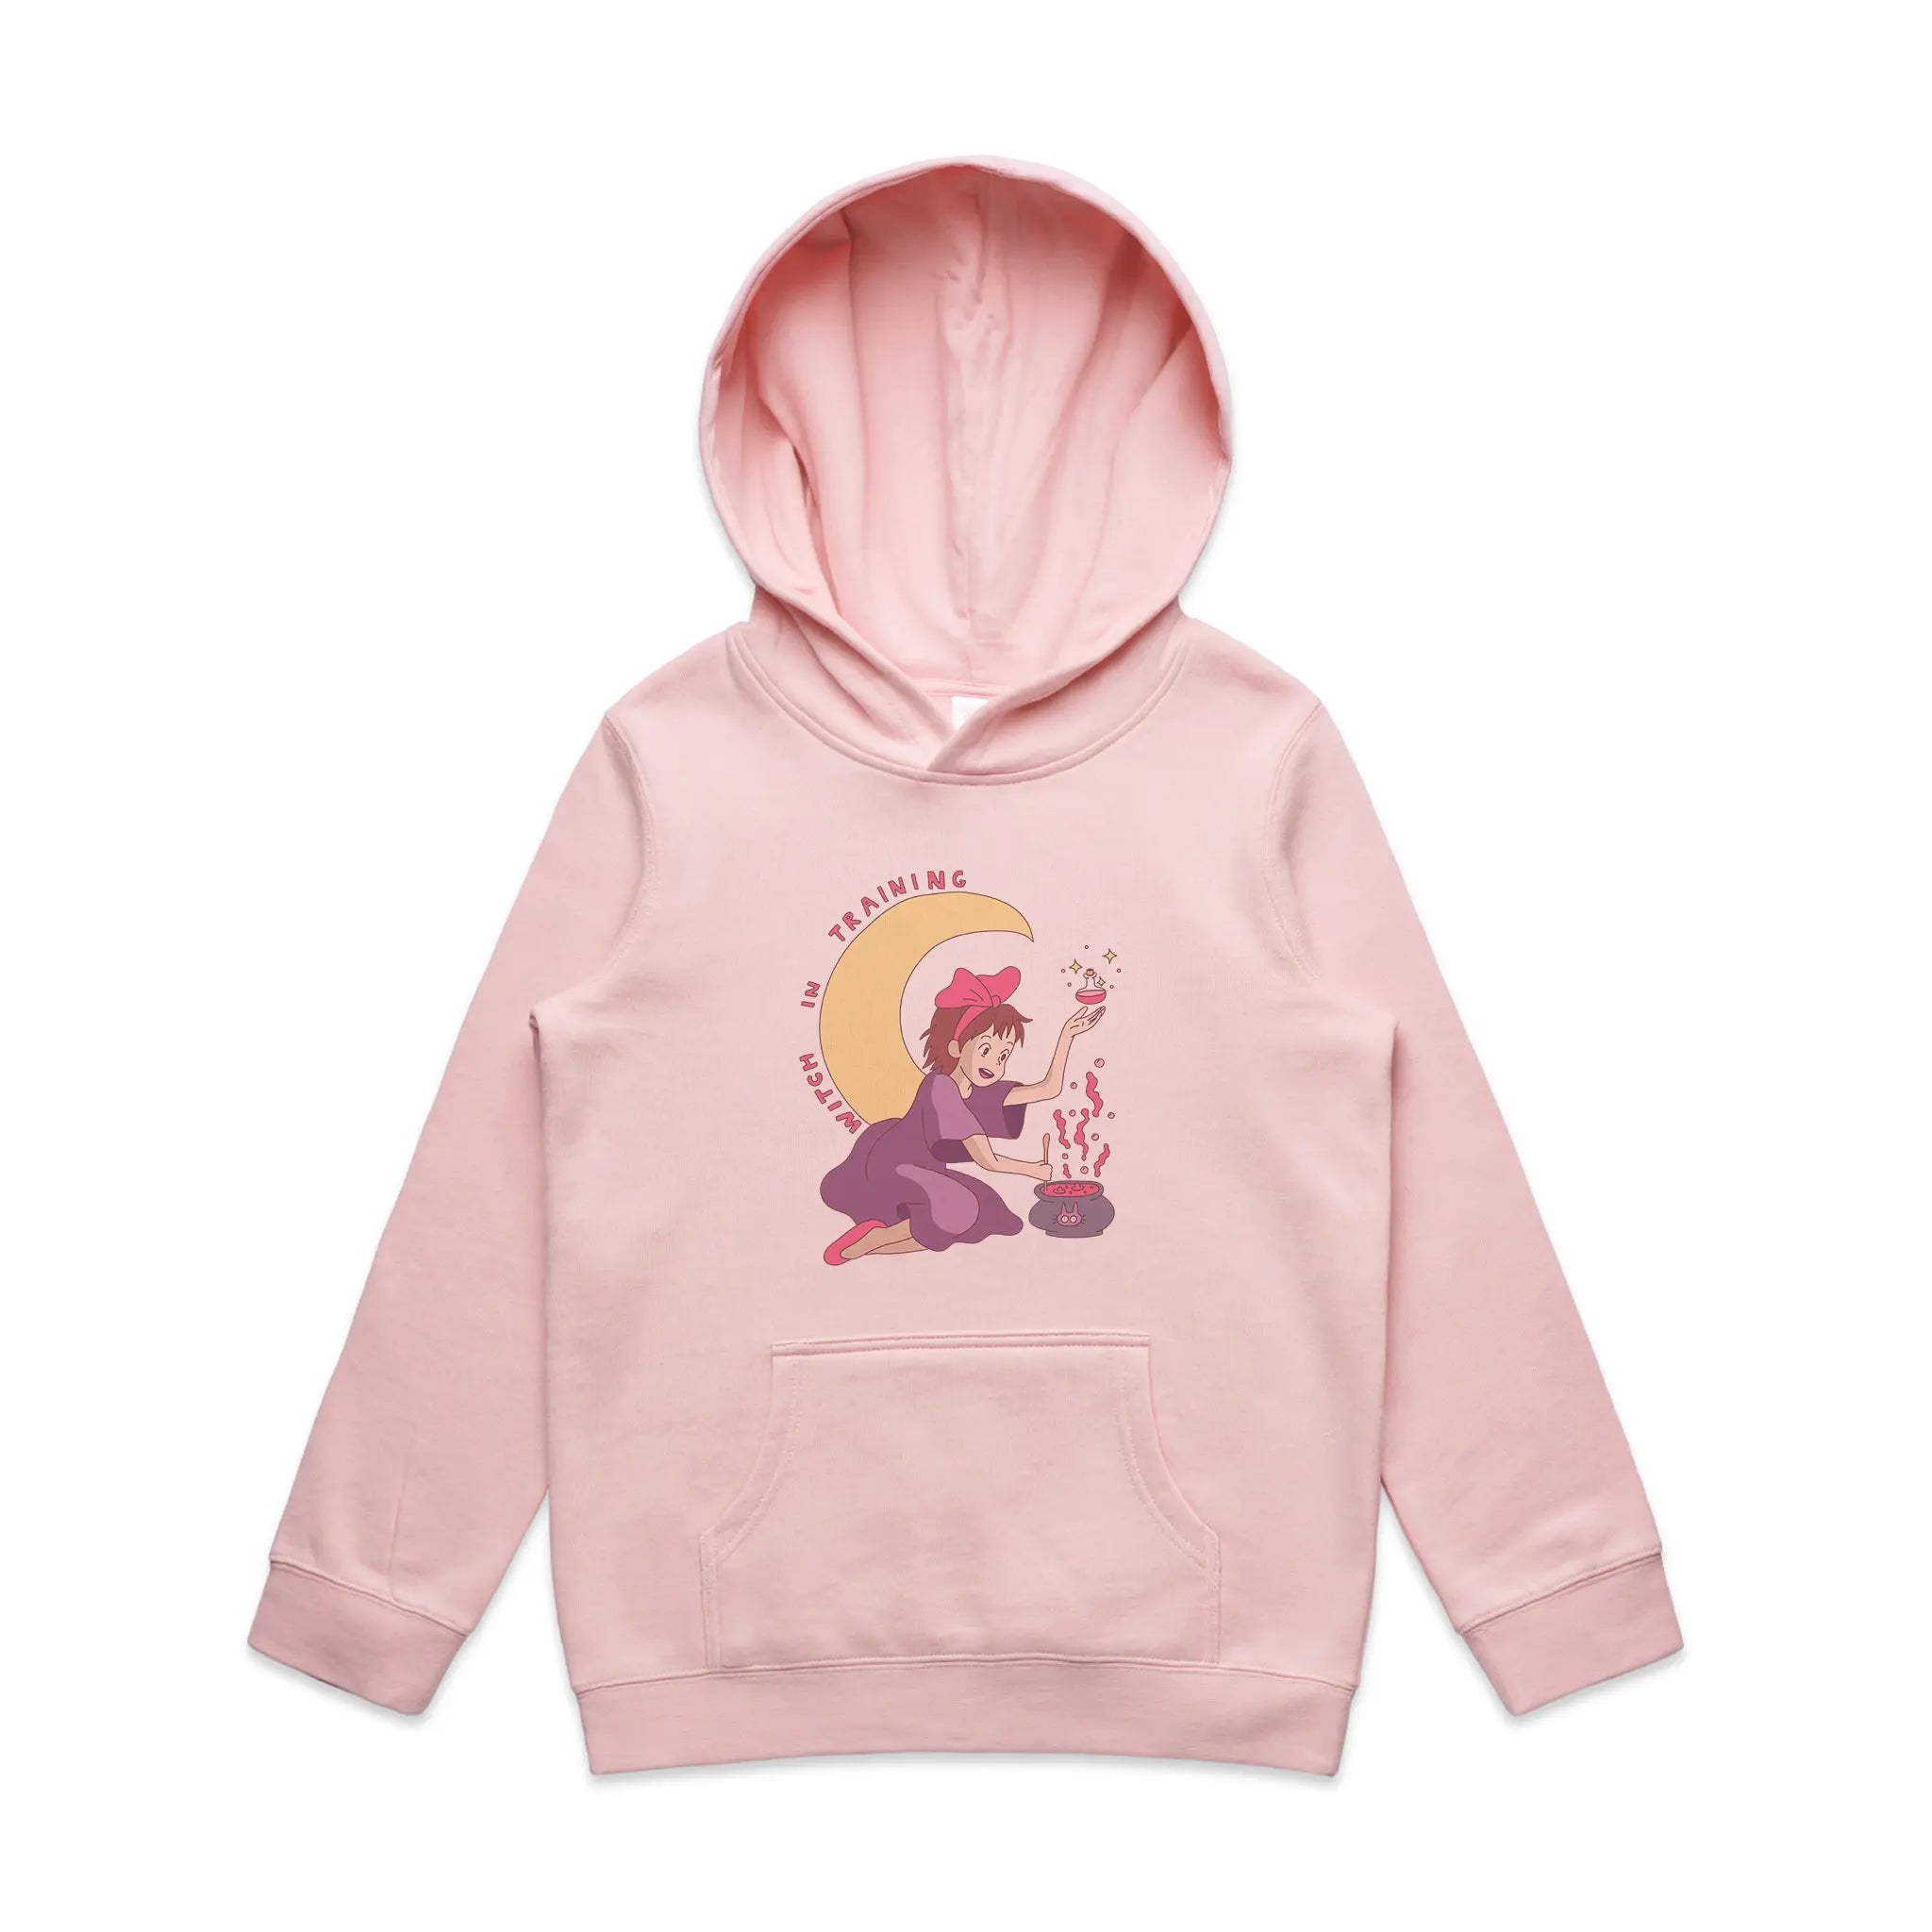 Witch In Training Kids Hoodie